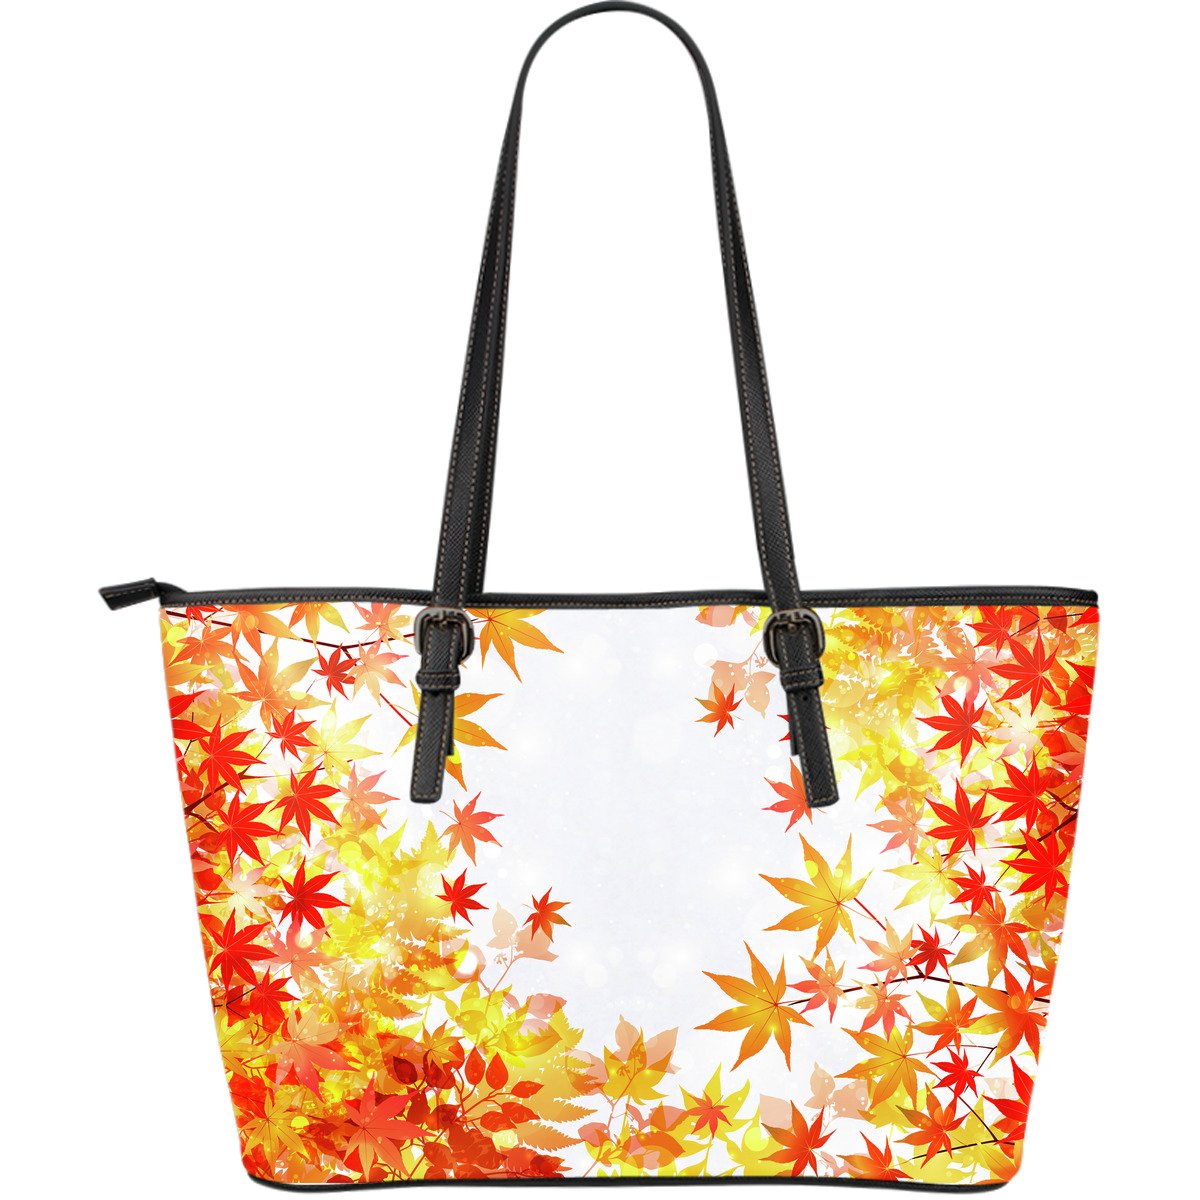 canada-maple-leaf-01-large-leather-tote-bags